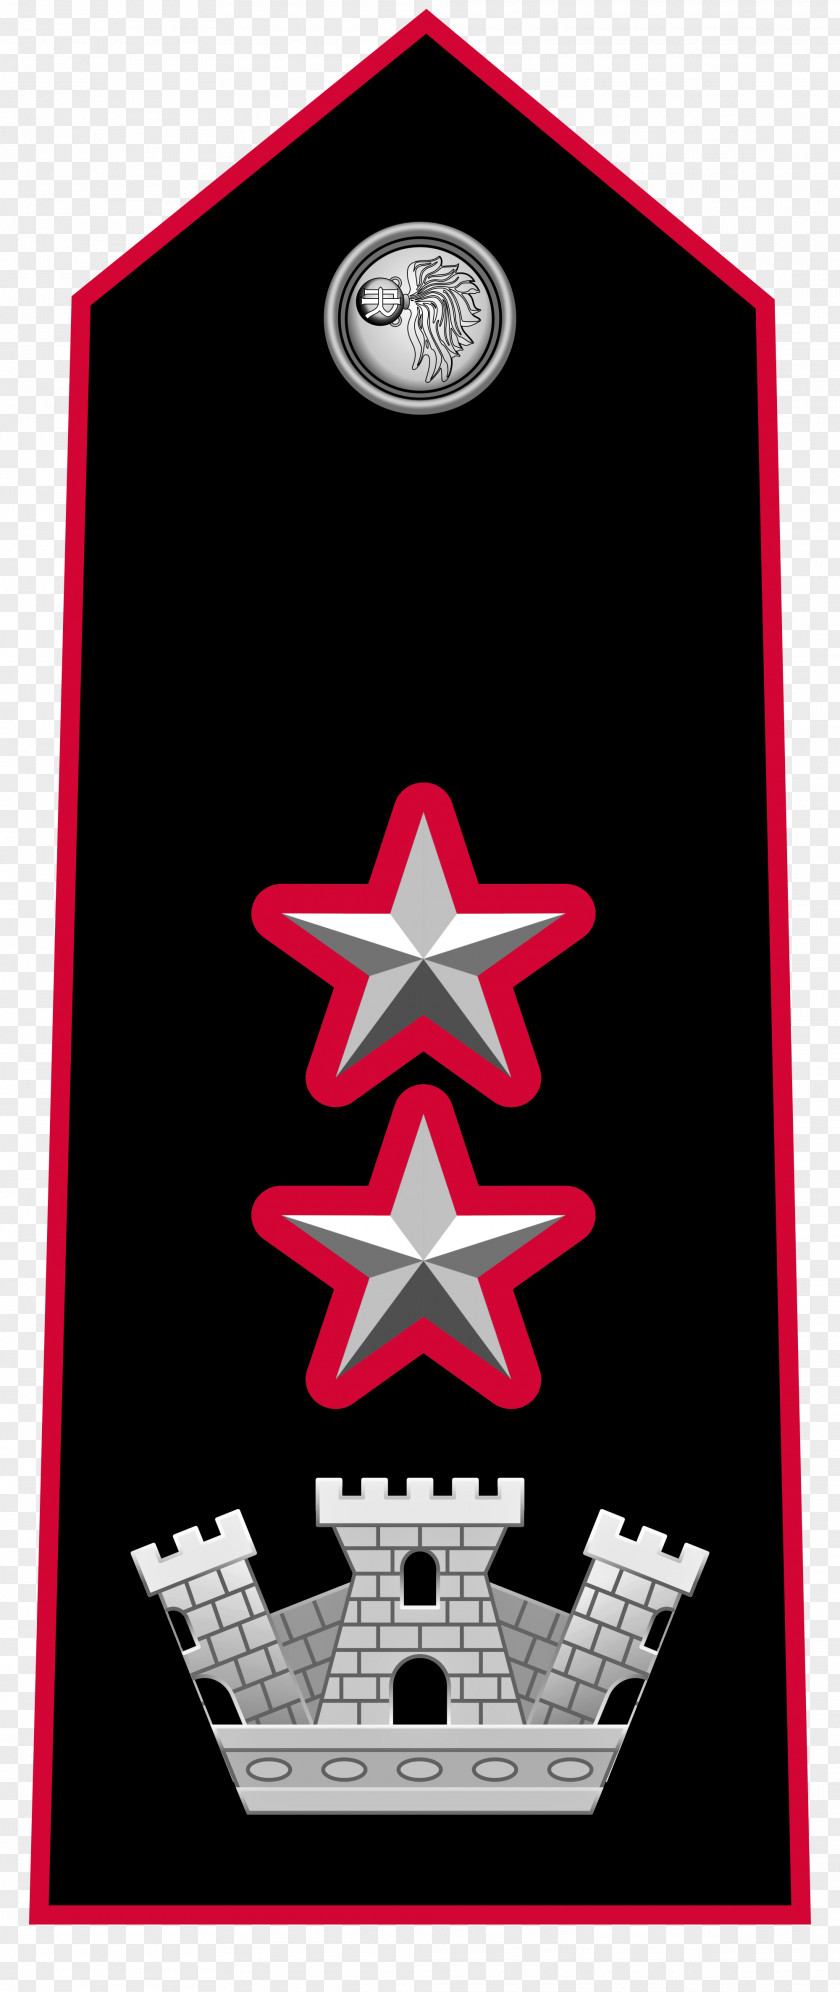 Carabinieri Rank Insignia Of The Military Major Army Officer PNG